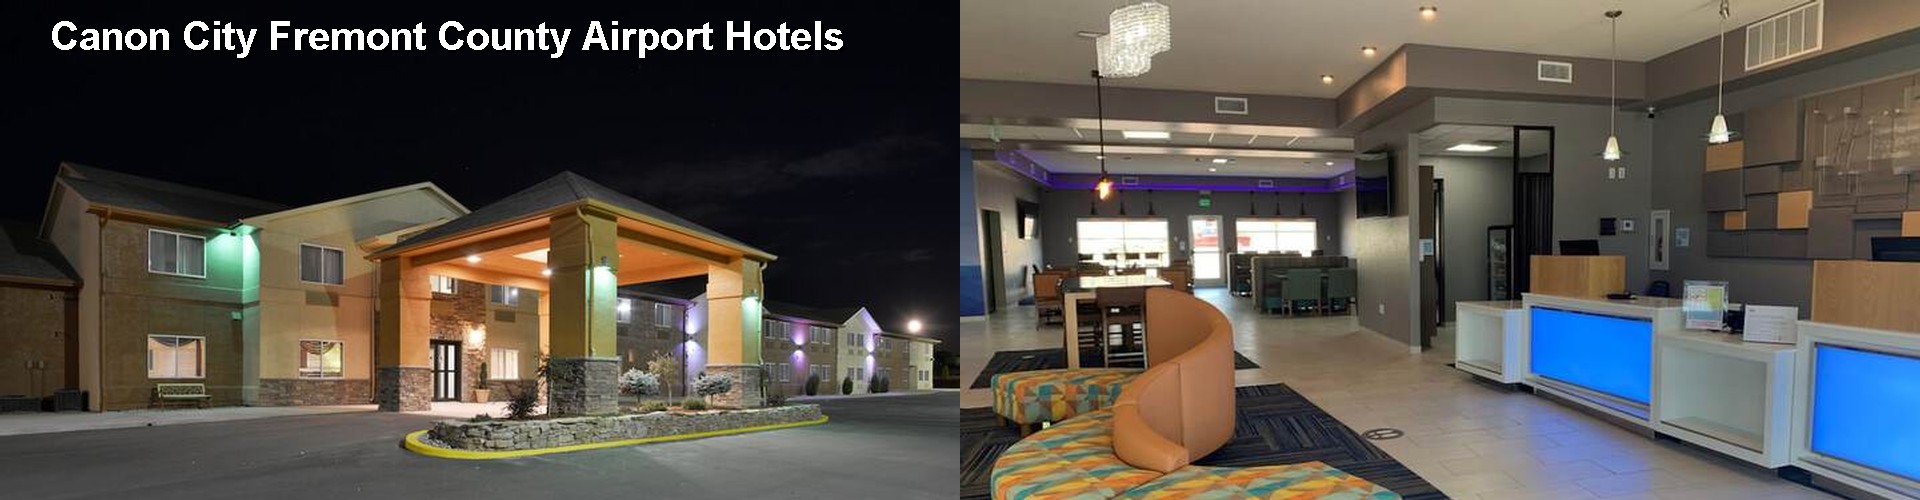 5 Best Hotels near Canon City Fremont County Airport